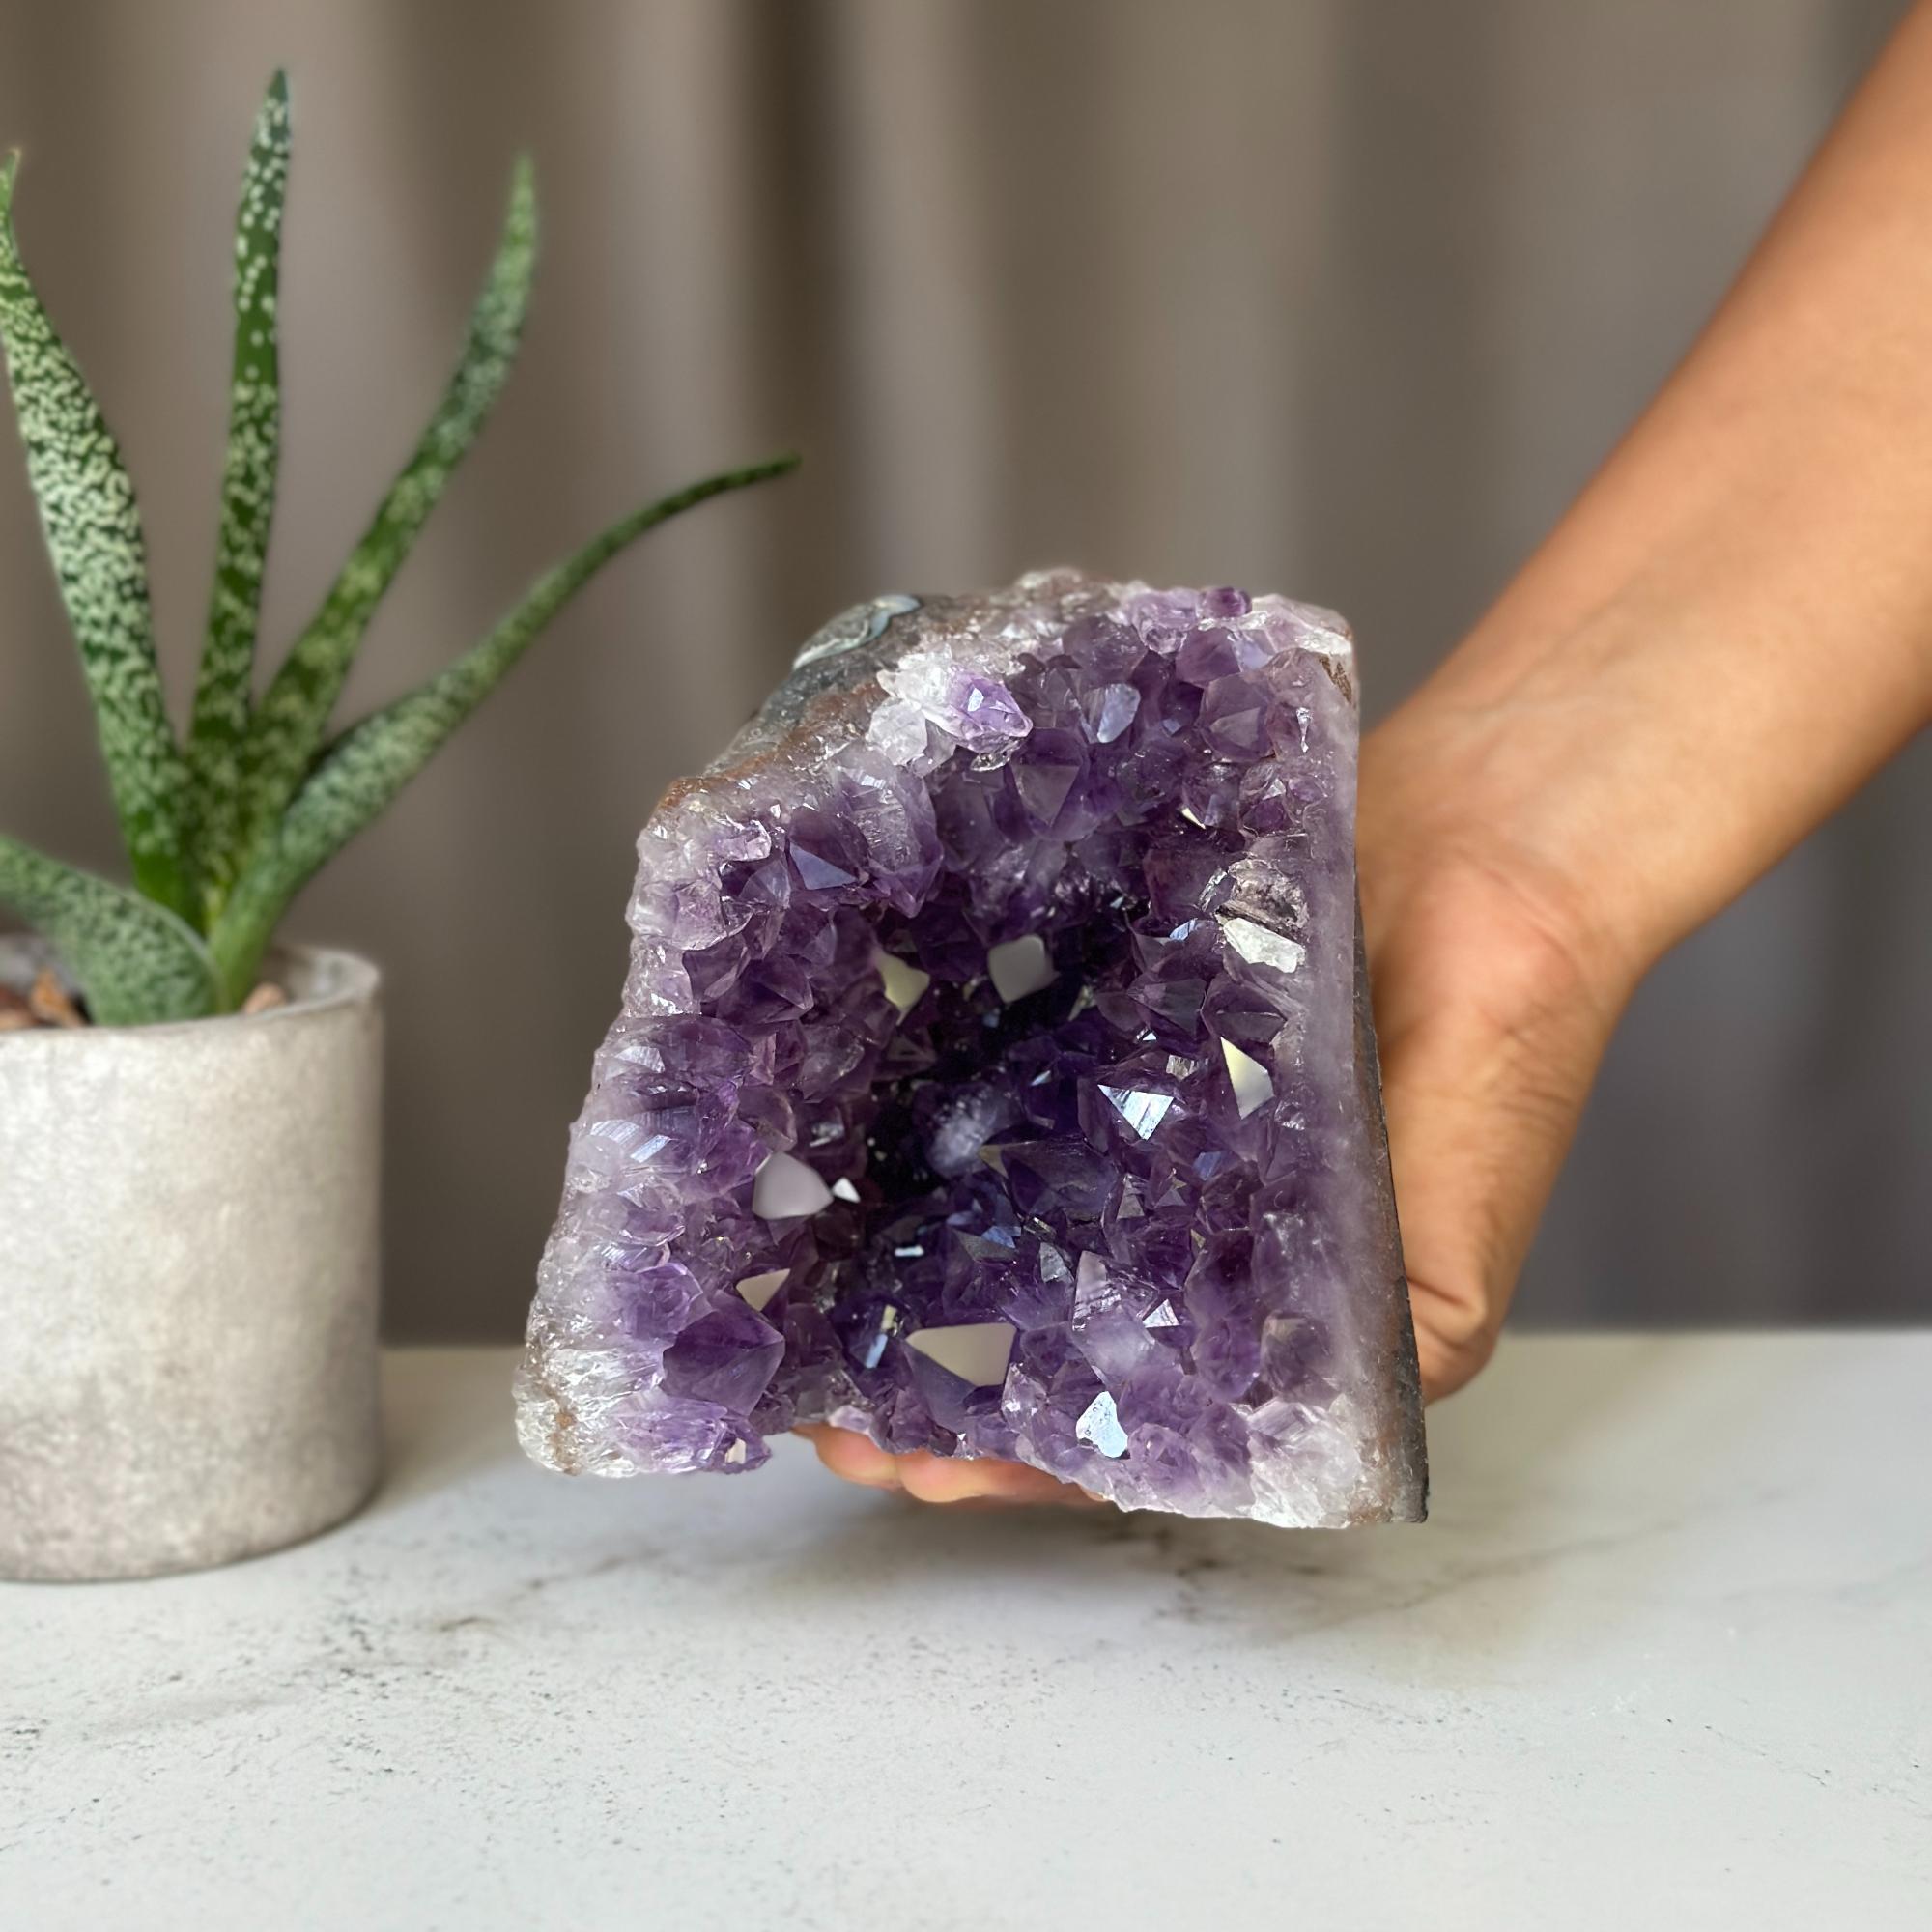 Amethyst Geode Crystal Cluster from Uruguay, Extra Large (3Lb) Anxiety Crystals with incredible agate edges